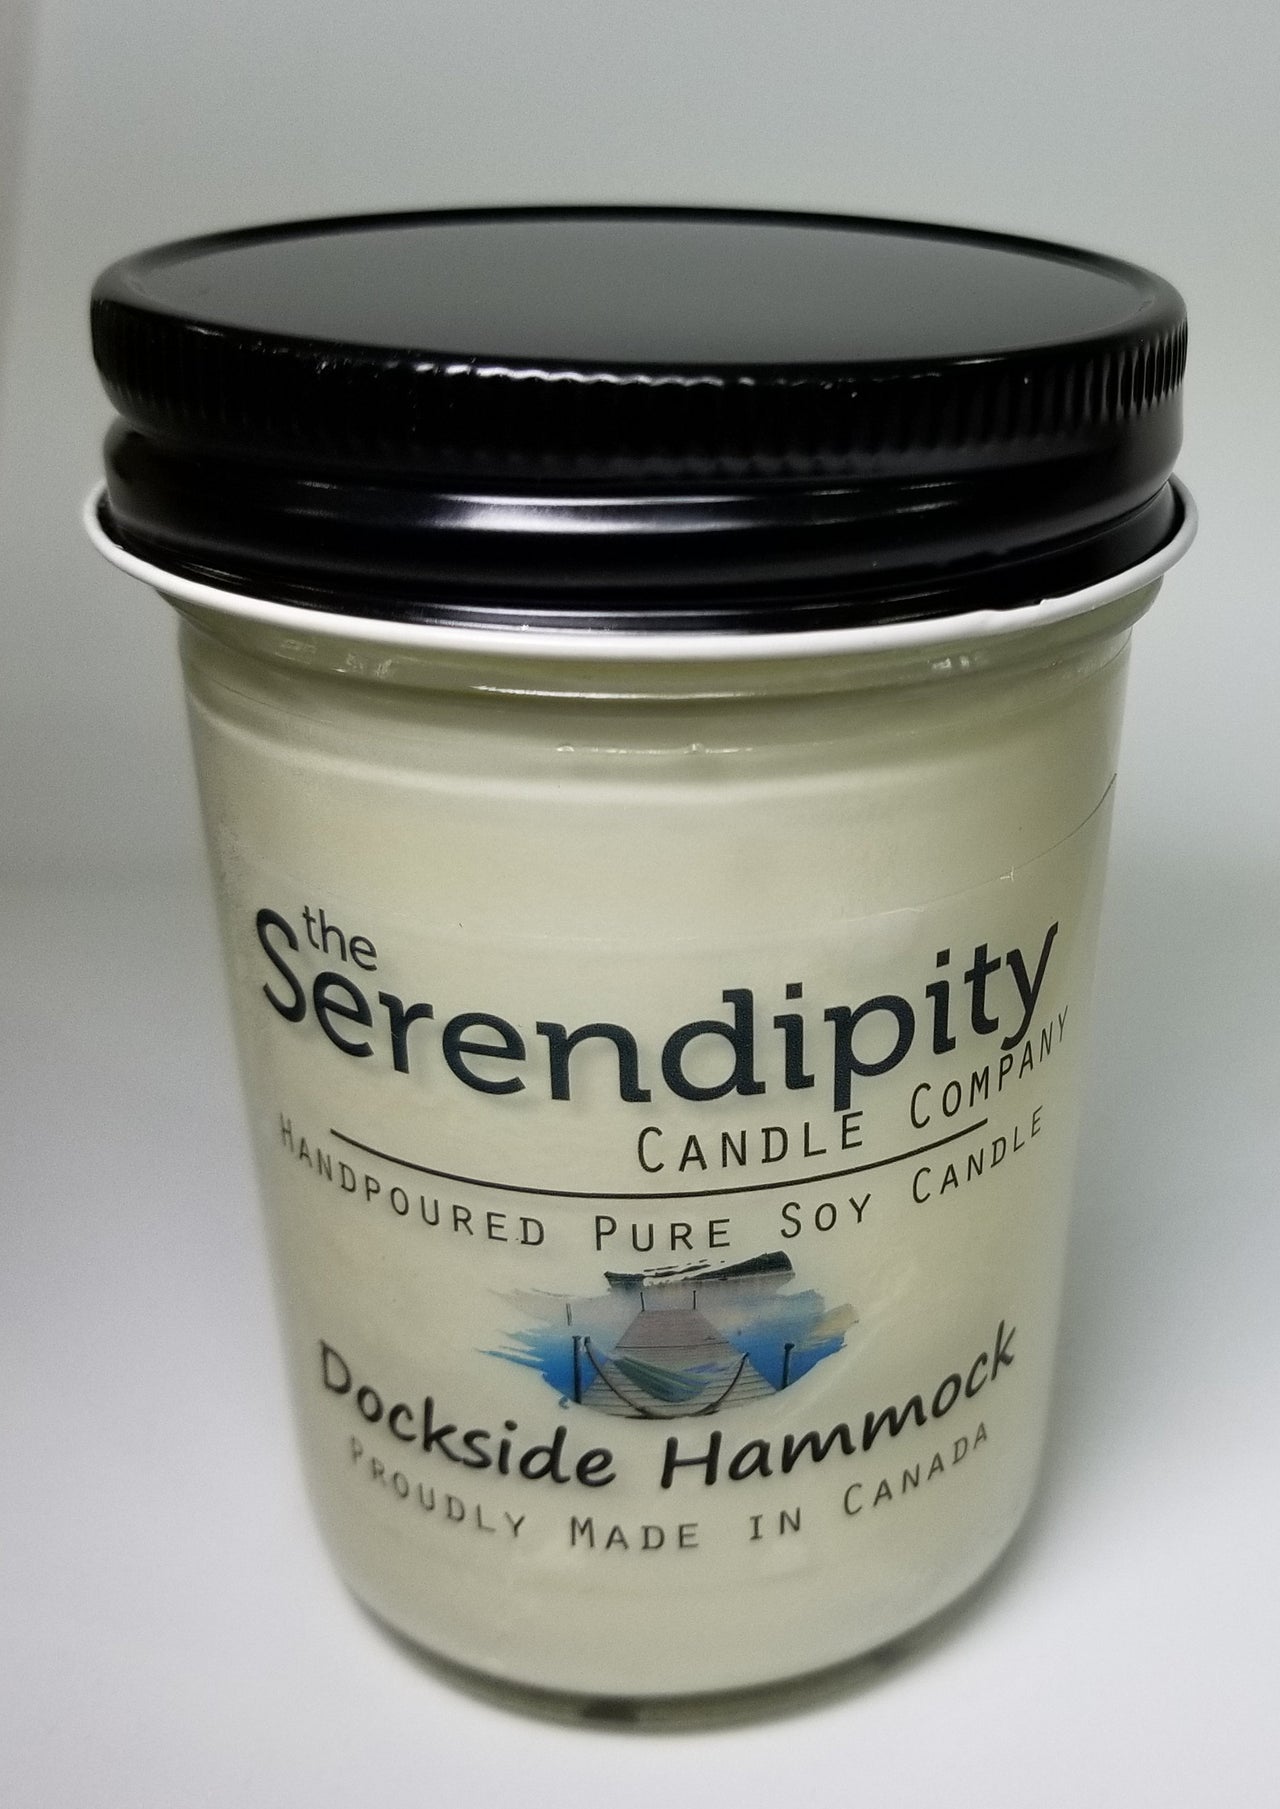 Serendipity Candle Collection - 8oz